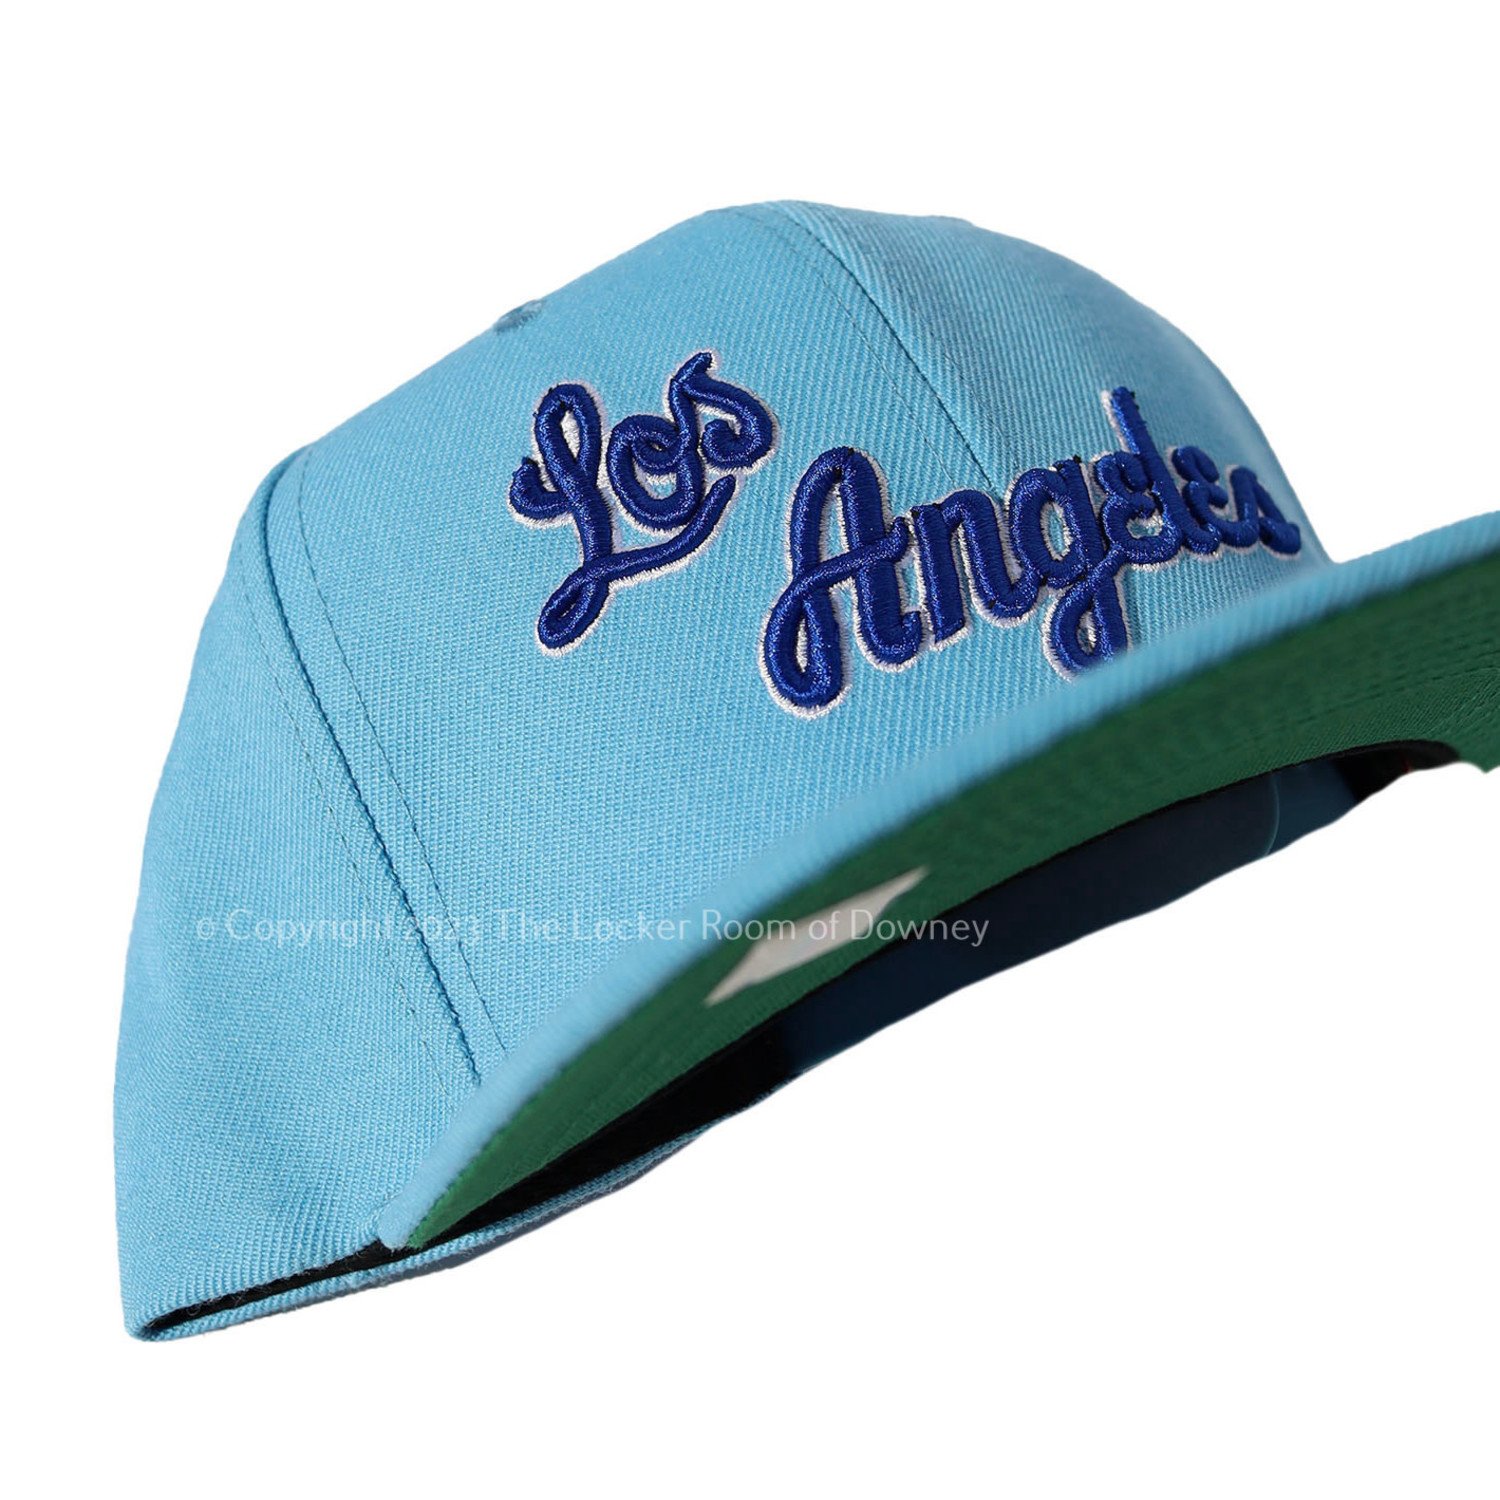 Los Angeles Lakers Mitchell And Ness Hardwood Classic NBA Snapback Cap